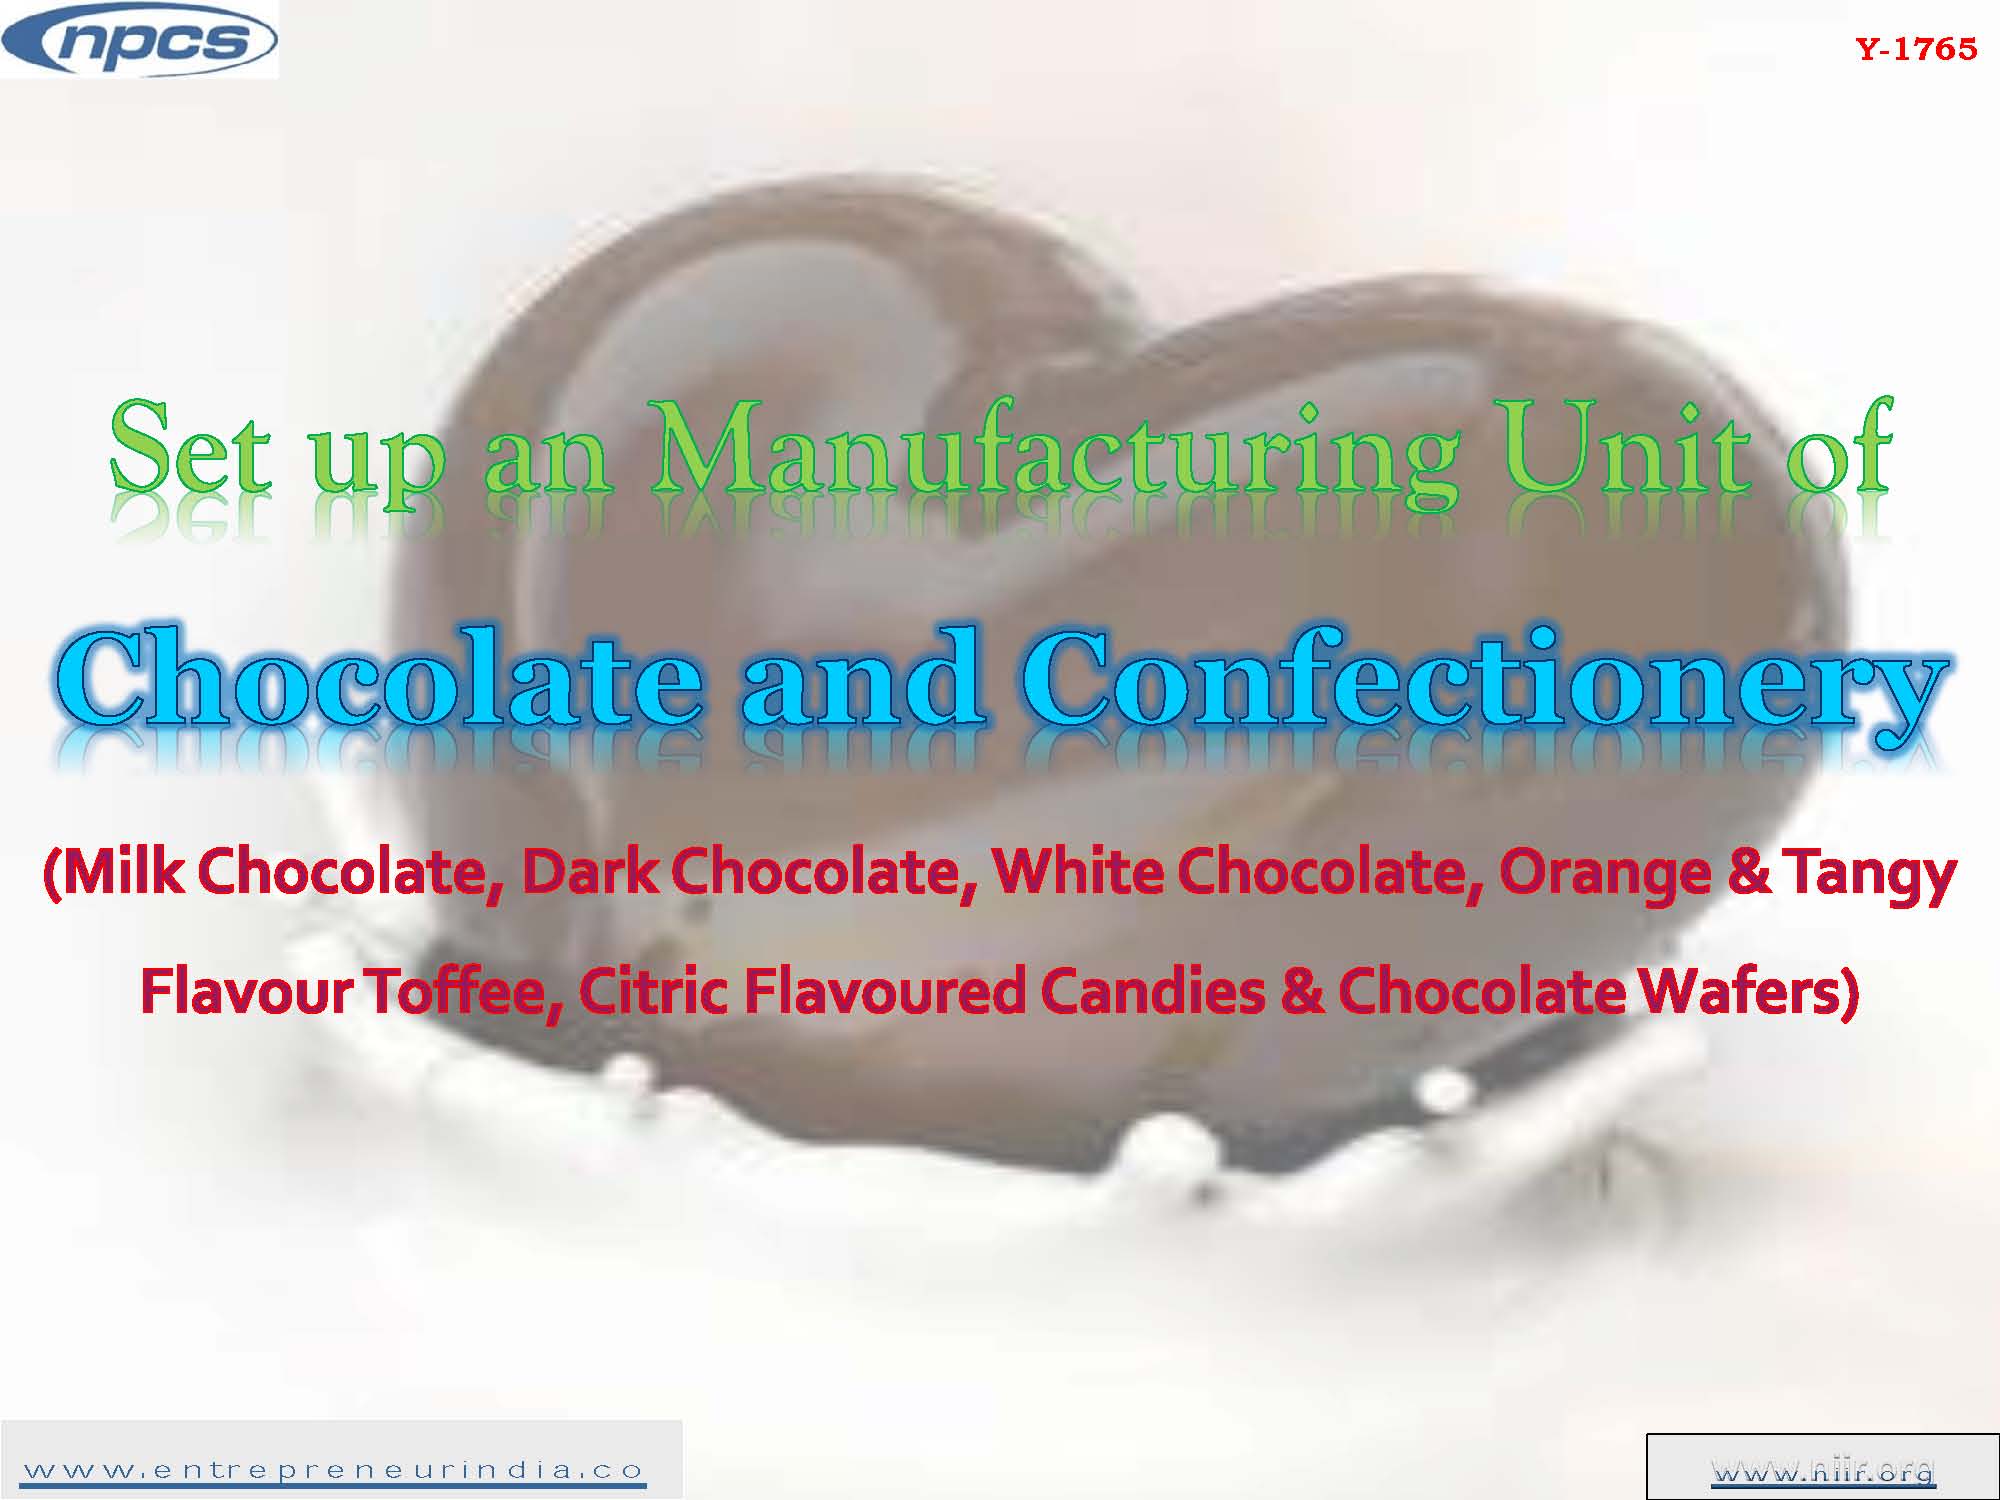 Set up an Manufacturing Unit of Chocolate and Confectionery Plant (Milk Chocolate, Dark Chocolate, White Chocolate, Orange & Tangy Flavour Toffee, Citric Flavoured Candies & Chocolate Wafers)